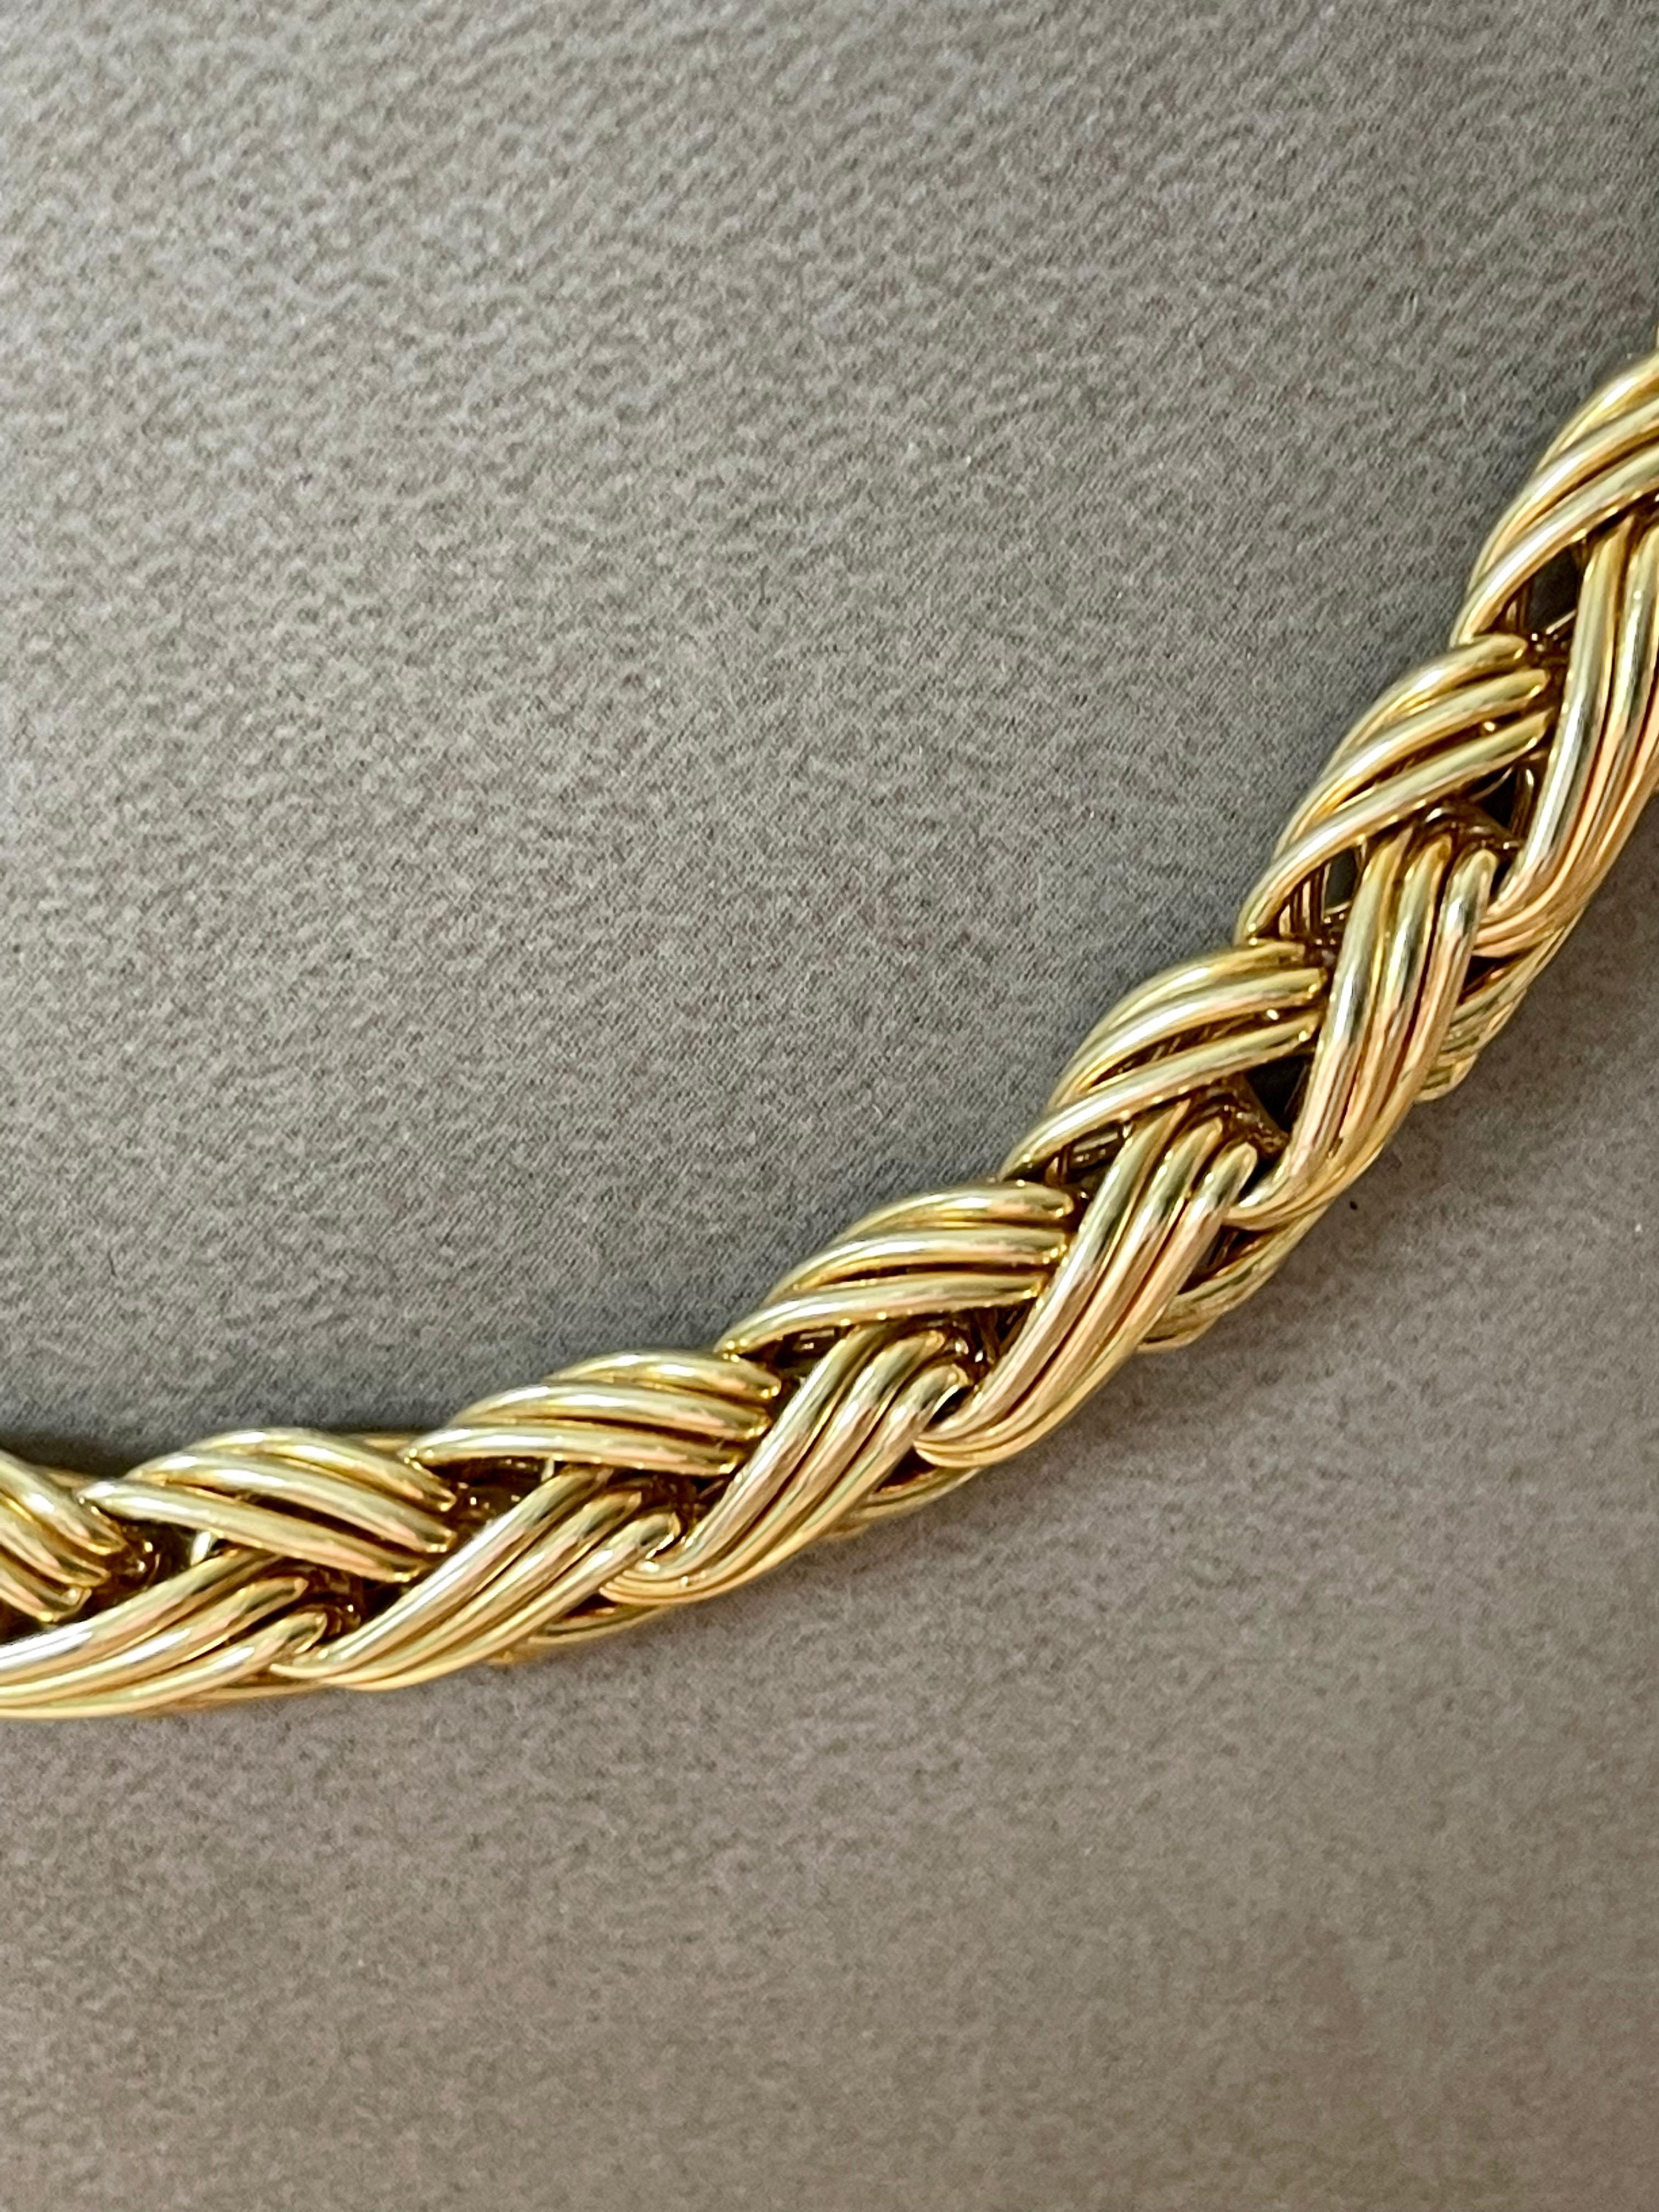 Contemporary Vintage 18 K Yellow Gold Cable Knit Neckalce and Bracelet Signed Meister Zurich For Sale